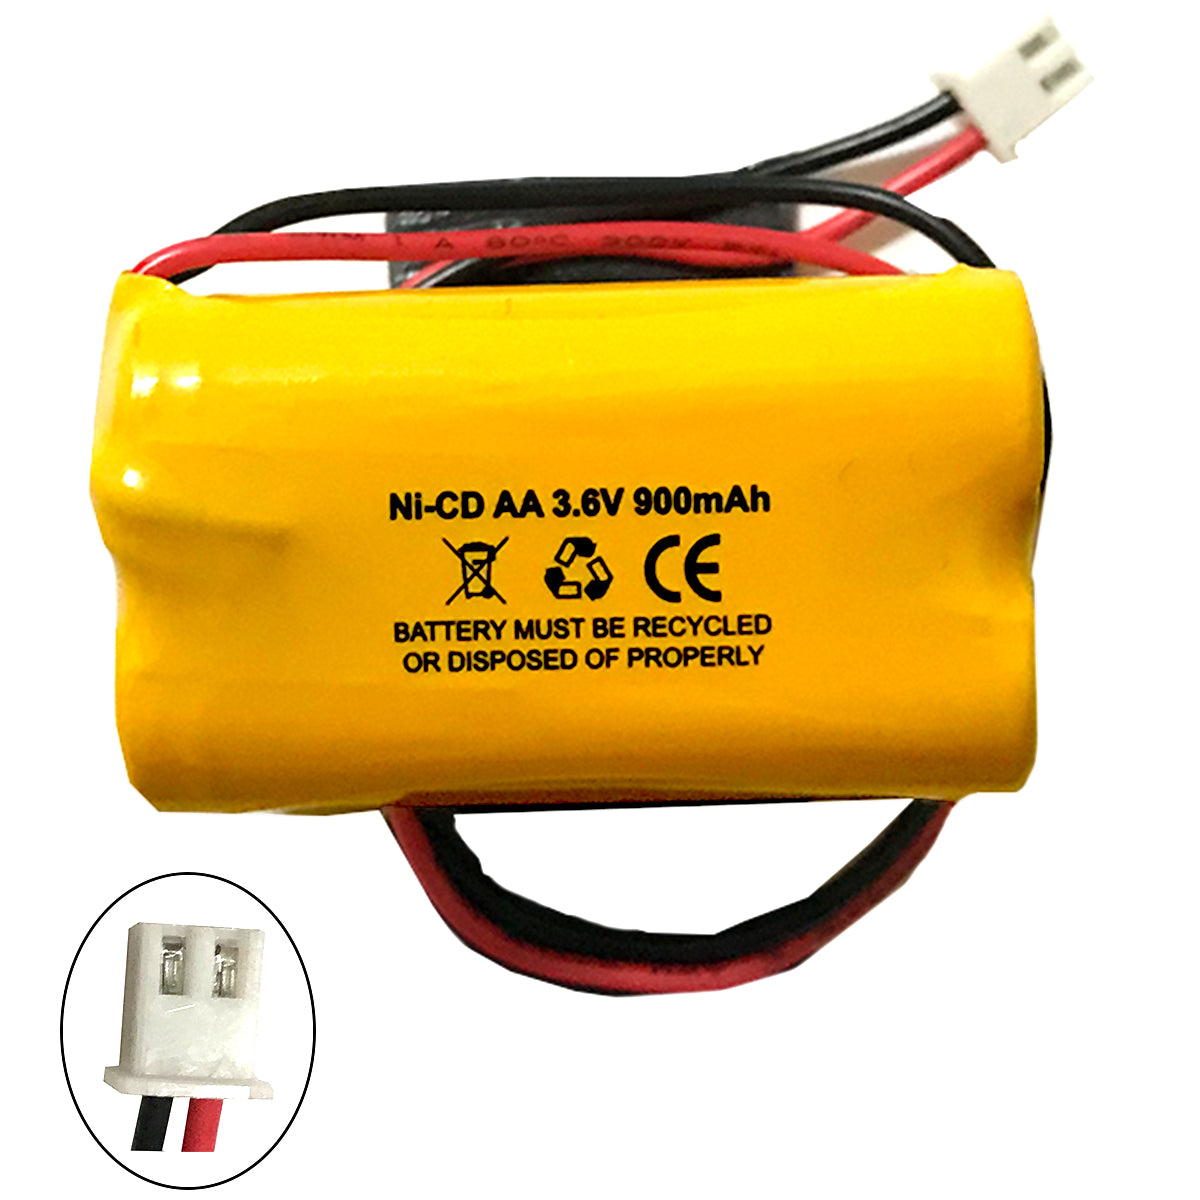 T26000188 3.6V-AA-900mAh Ni-CD Battery Replacement for Emergency / Exit  Light